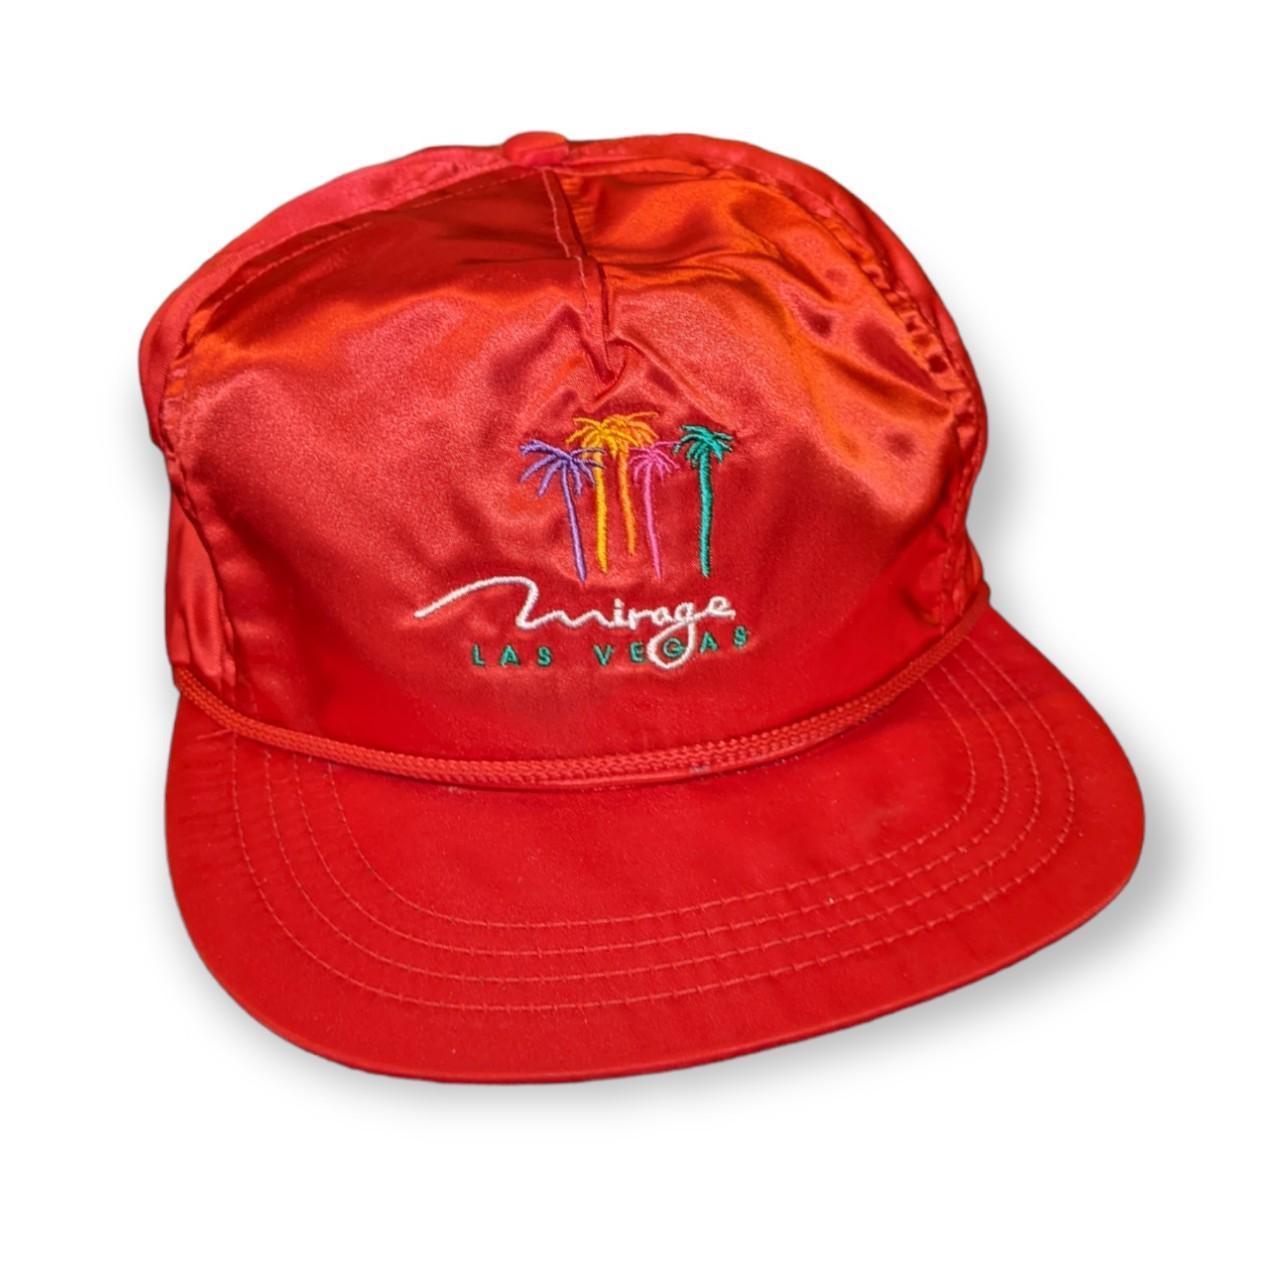 ICO Red Throwback Hat